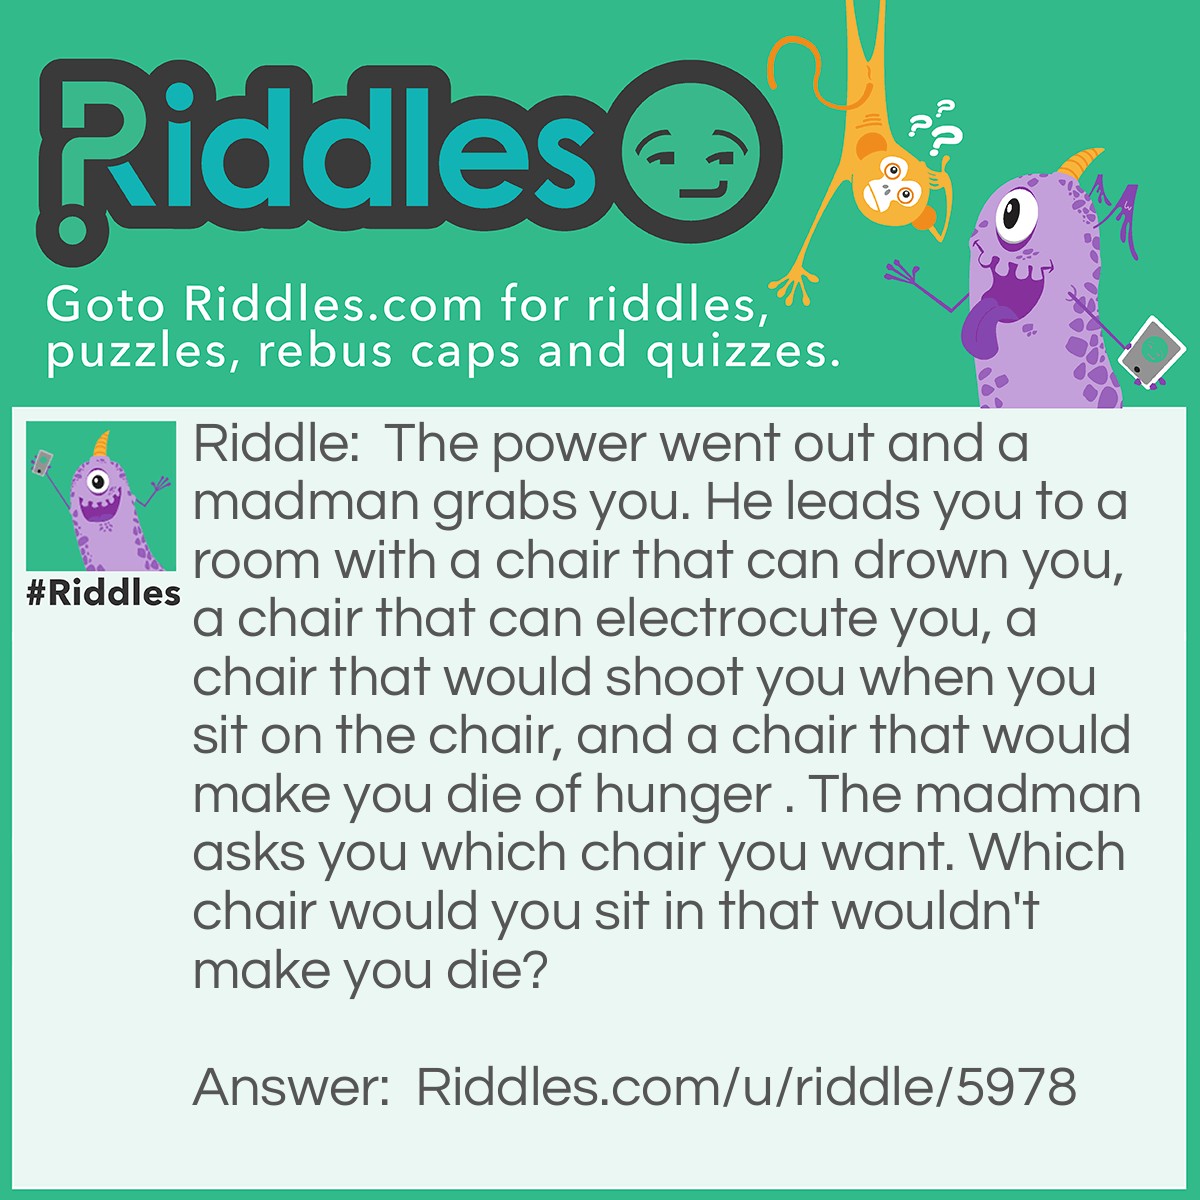 Riddle: The power went out and a madman grabs you. He leads you to a room with a chair that can drown you, a chair that can electrocute you, a chair that would shoot you when you sit on the chair, and a chair that would make you die of hunger . The madman asks you which chair you want. Which chair would you sit in that wouldn't make you die? Answer: The electric chair, because the power went out.